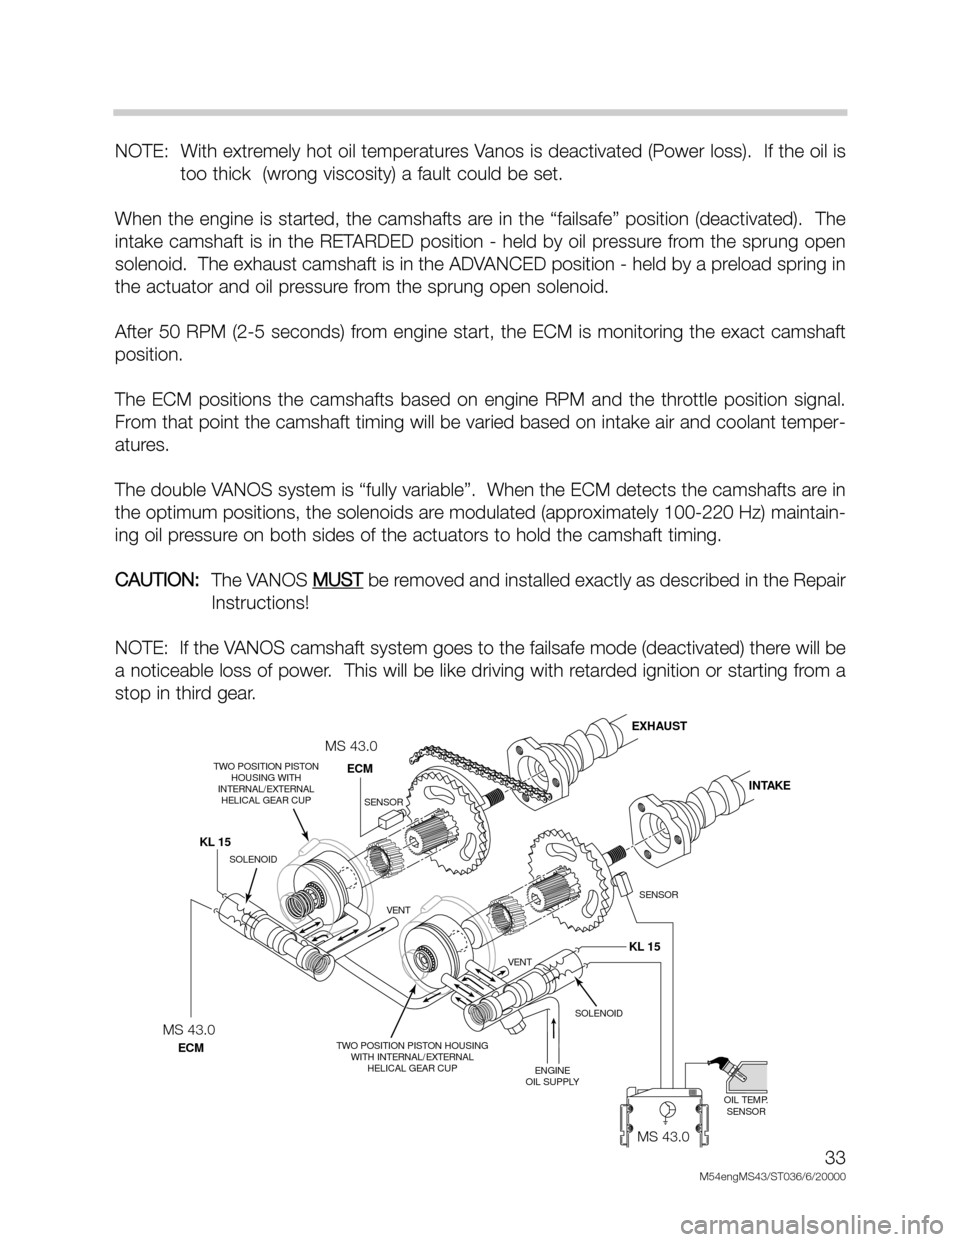 BMW X5 2000 E53 M54 Engine Owners Manual 33
M54engMS43/ST036/6/20000
NOTE:  With extremely hot oil temperatures Vanos is deactivated (Power loss).  If the oil is
too thick  (wrong viscosity) a fault could be set.
When the engine is started, 